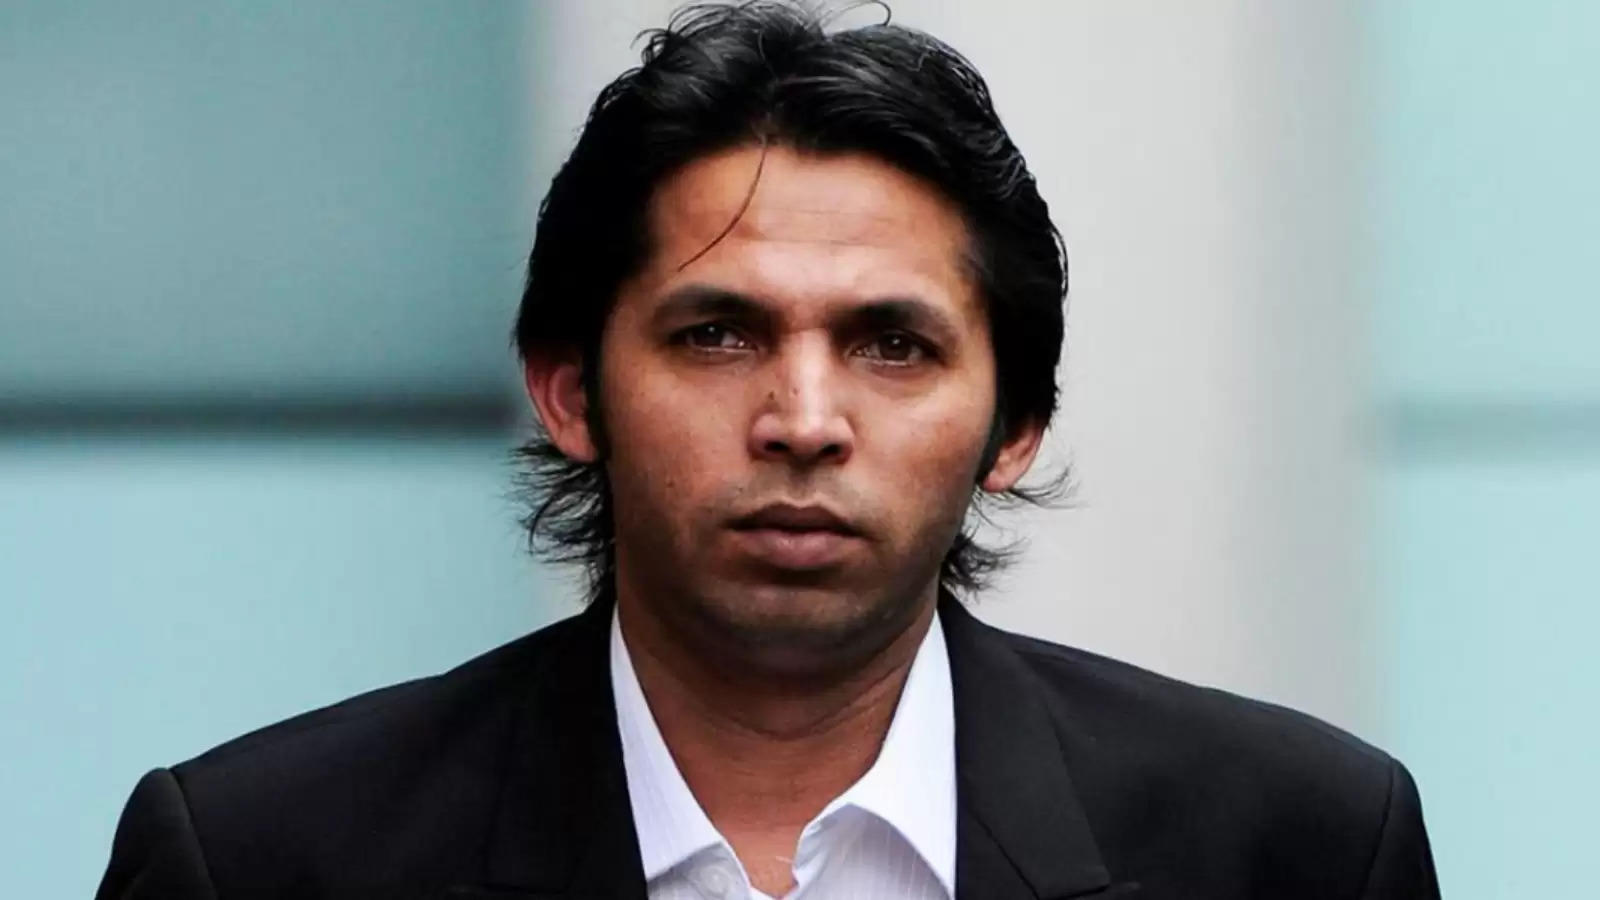 Mohammad Asif makes a controversial remark on Babar Azam.